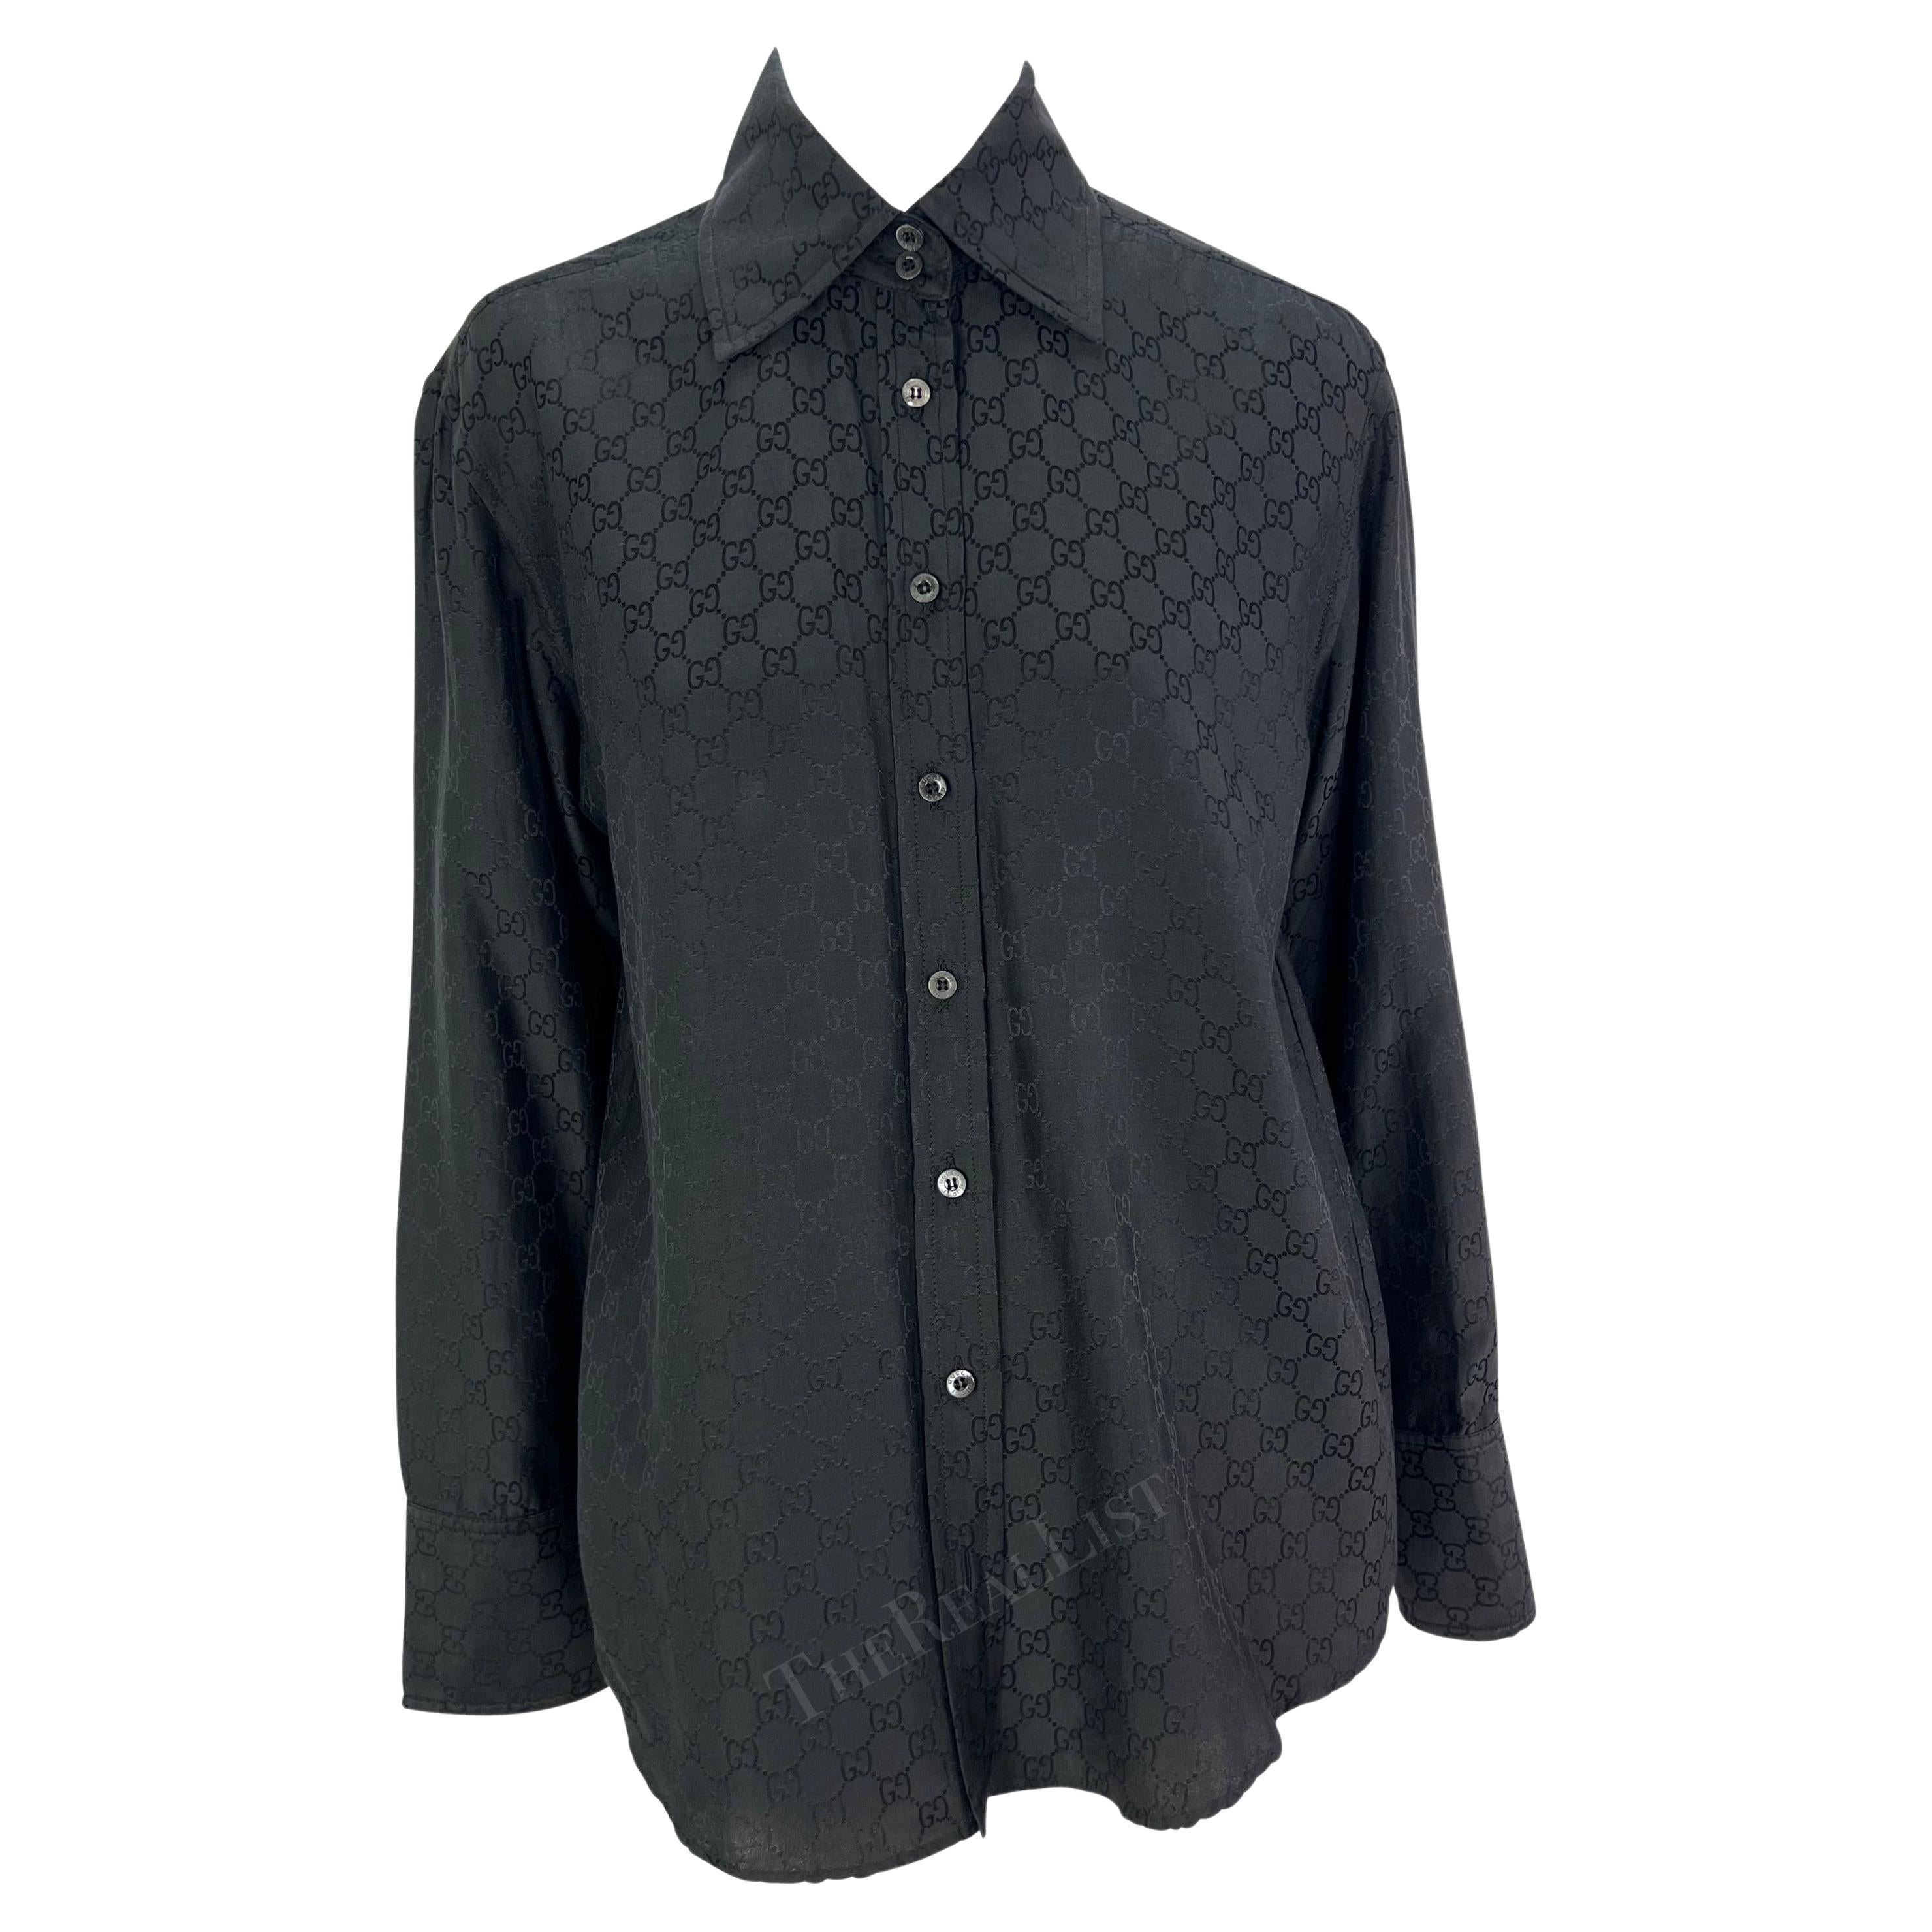 Presenting an iconic Gucci 'GG' monogram button up shirt, designed by Tom Ford. From Ford's Spring/Summer 1998 collection, this shirt is constructed entirely of 'GG' monogram pattern fabric and features a collar, a front button closure, and built in